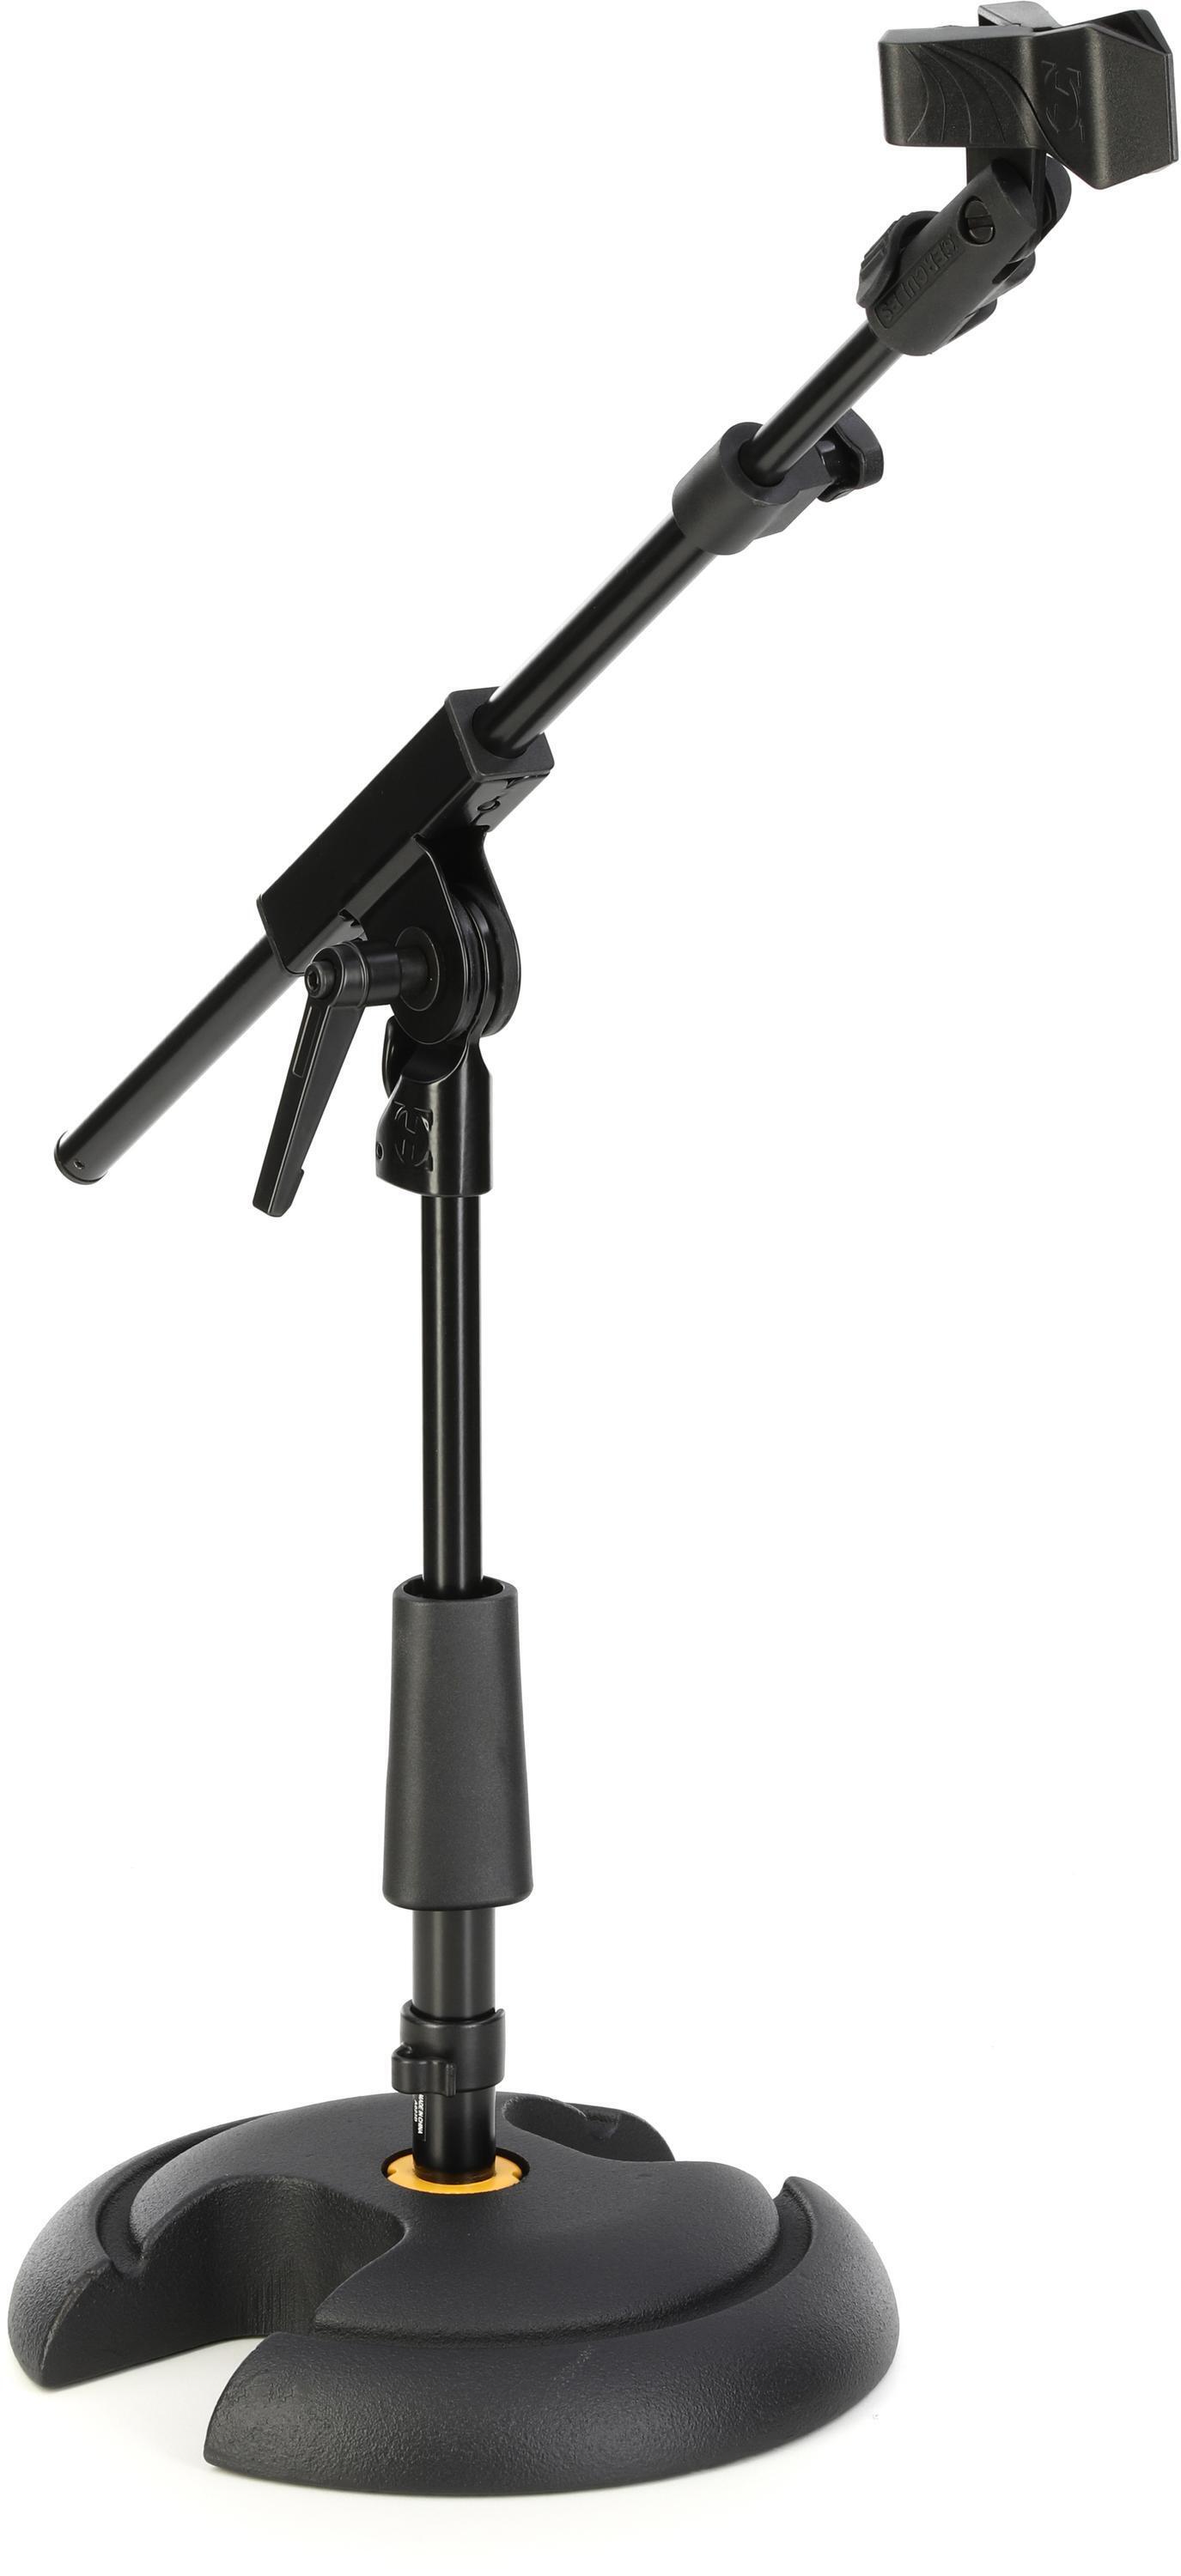 Bundled Item: Hercules Stands MS120BPRO Low-profile Microphone Stand